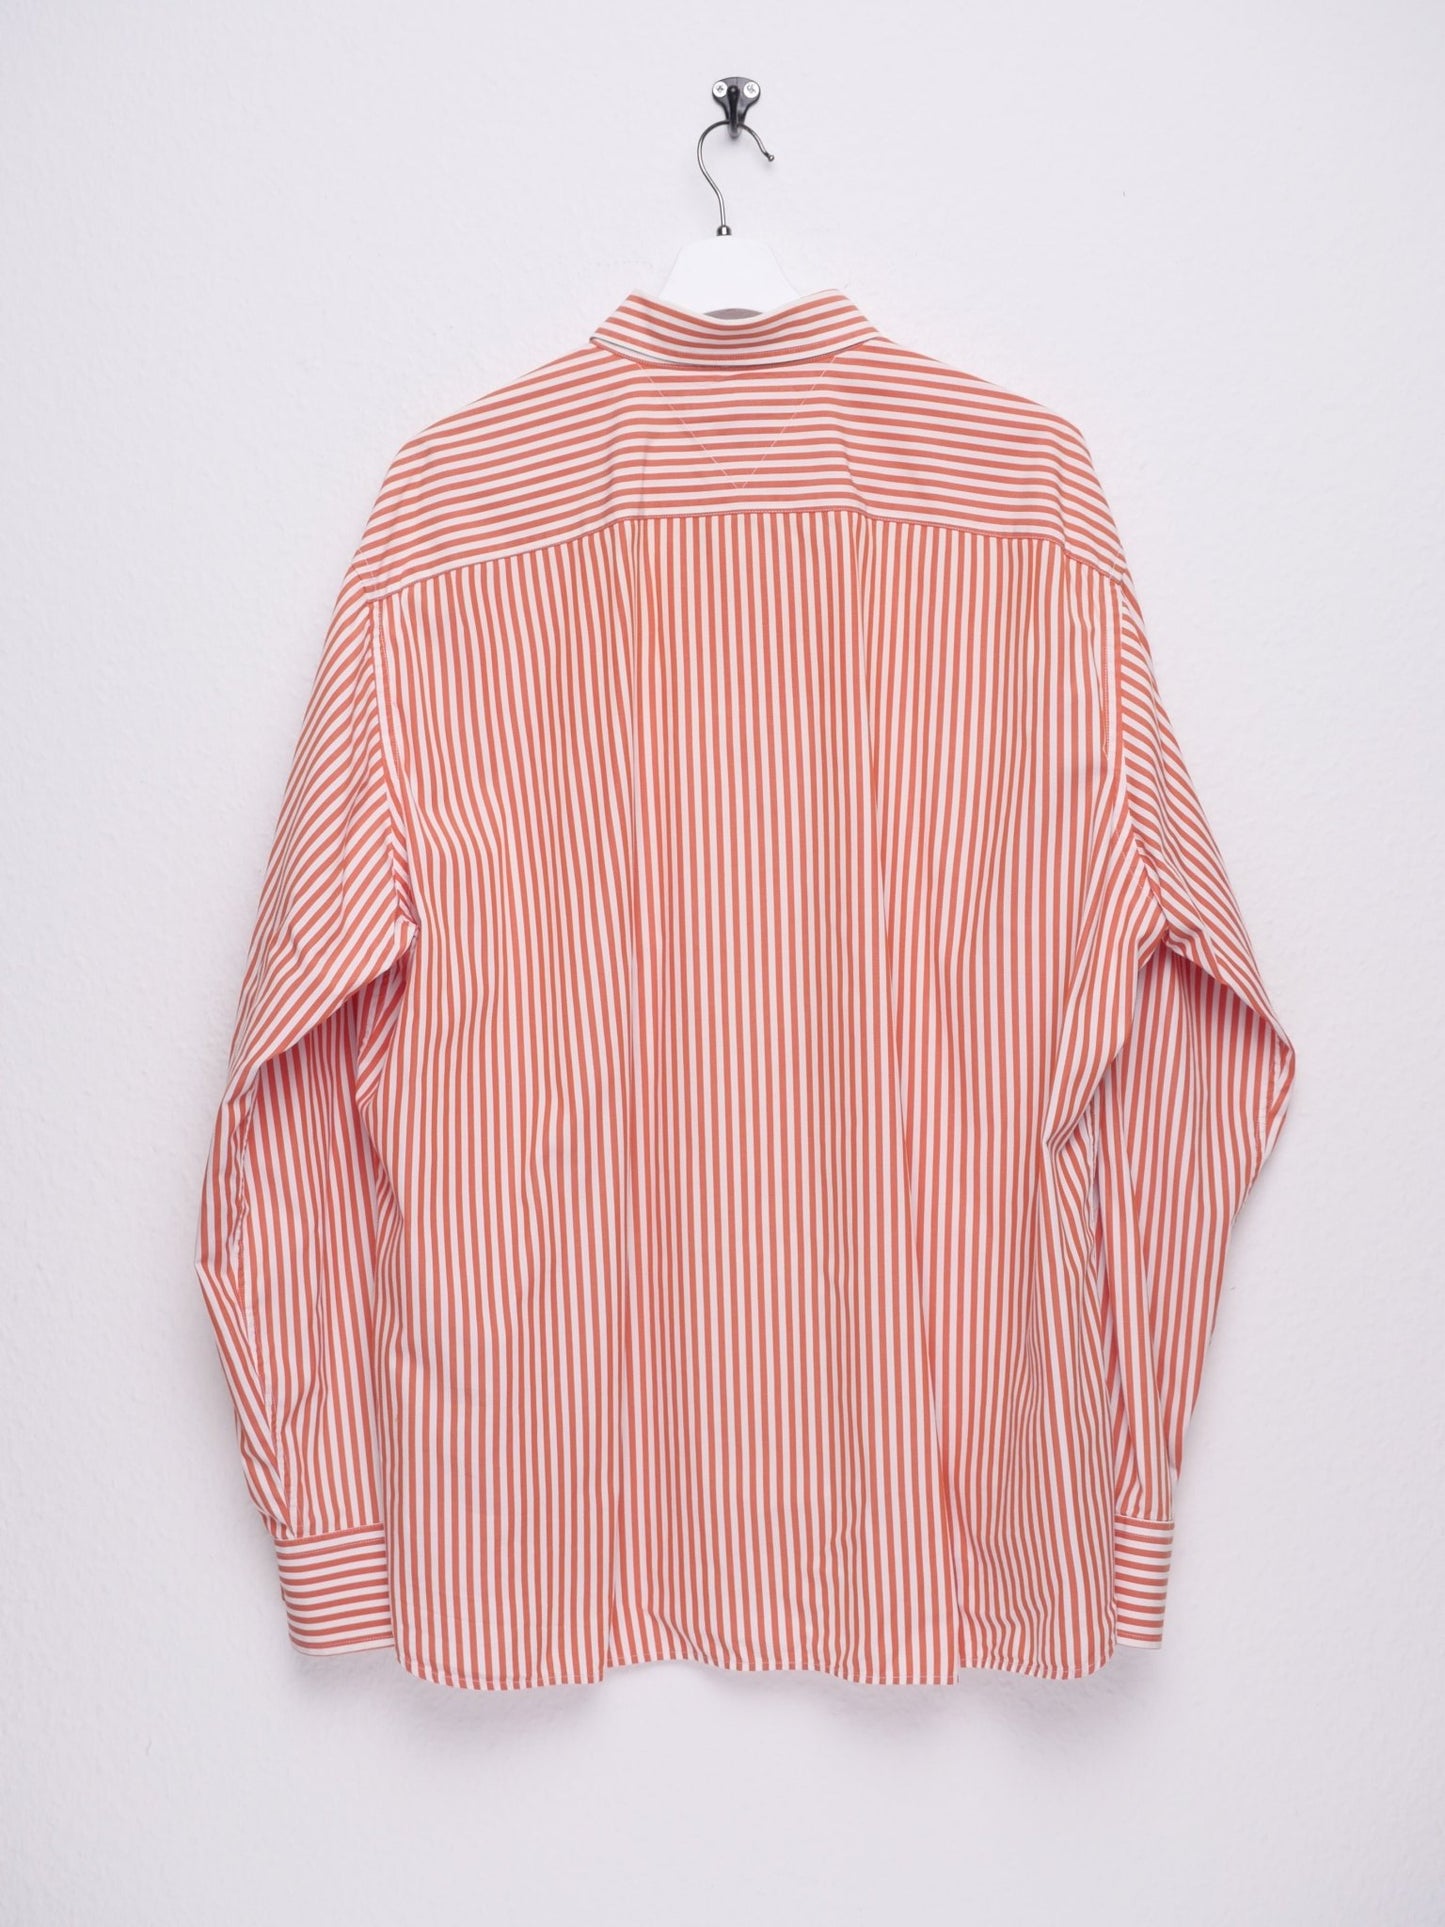 Tommy Hilfiger embroidered Logo striped Button Down - Peeces